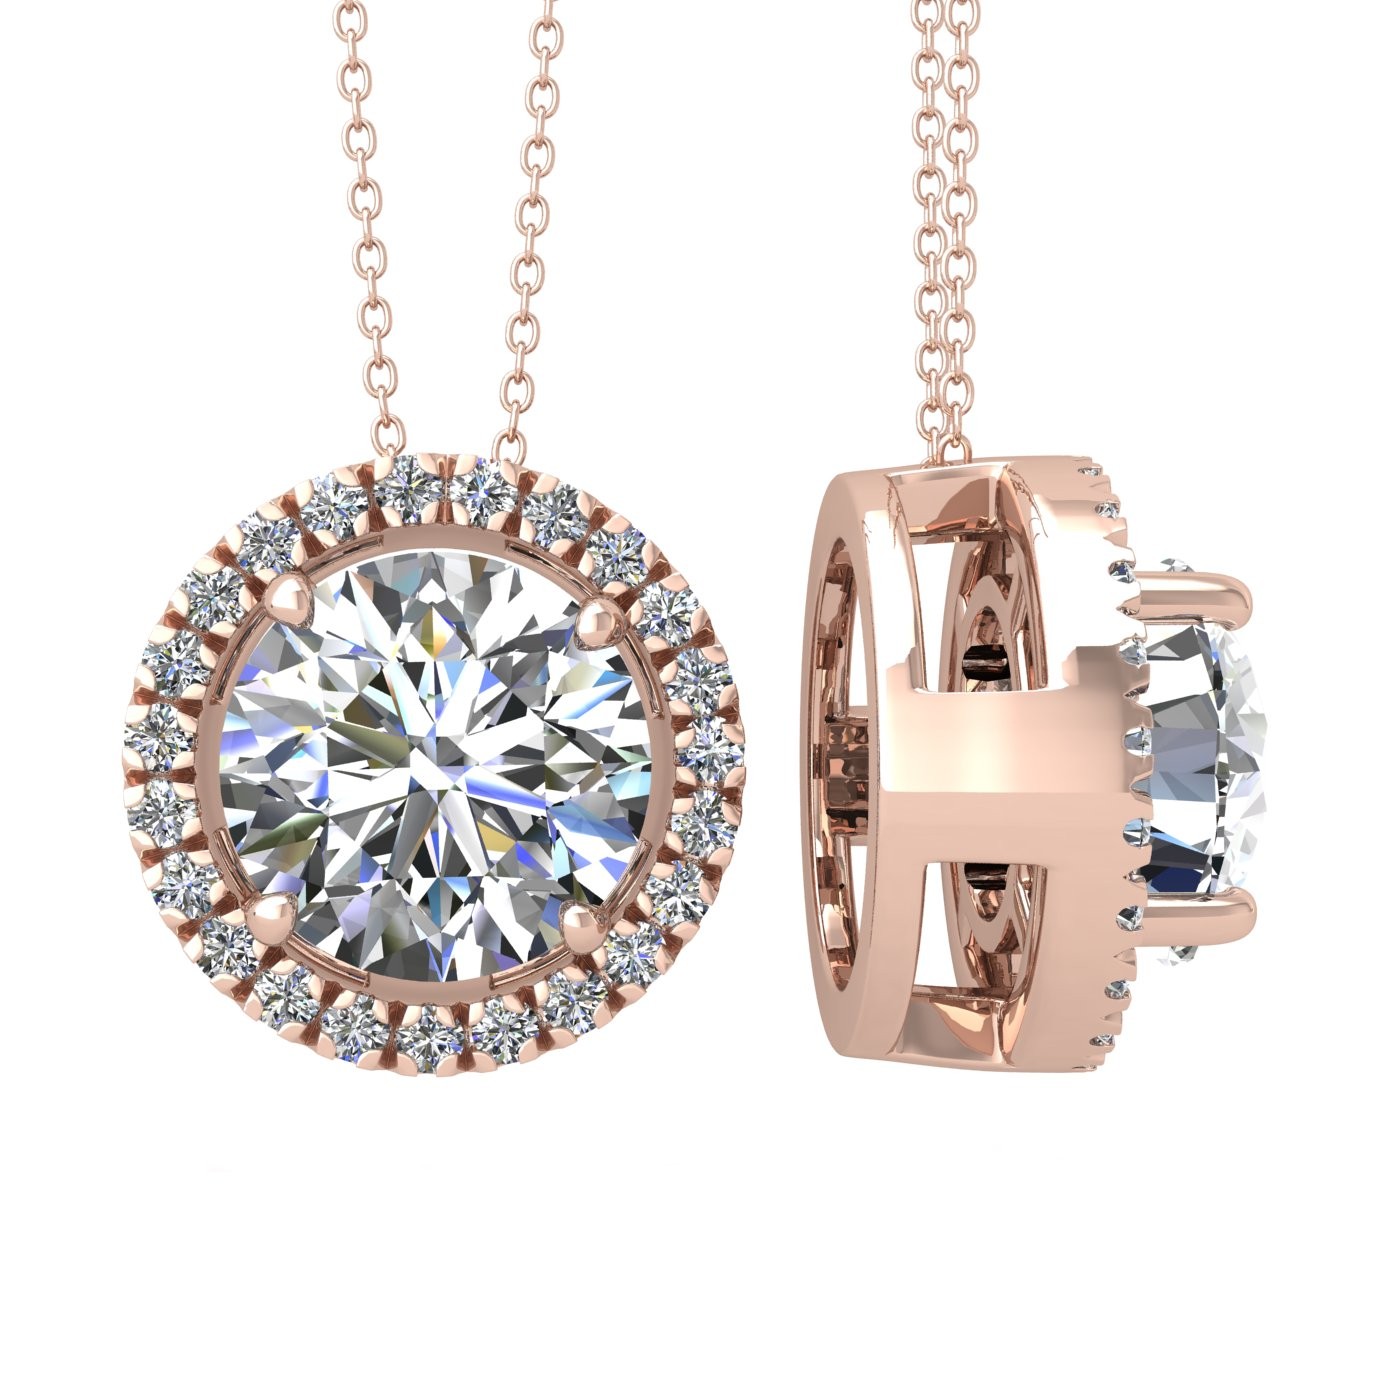 18k rose gold  2.5 ct 4 prong round shape diamond pendant with diamond pavÉ set halo including chain seperate from the pendant Photos & images